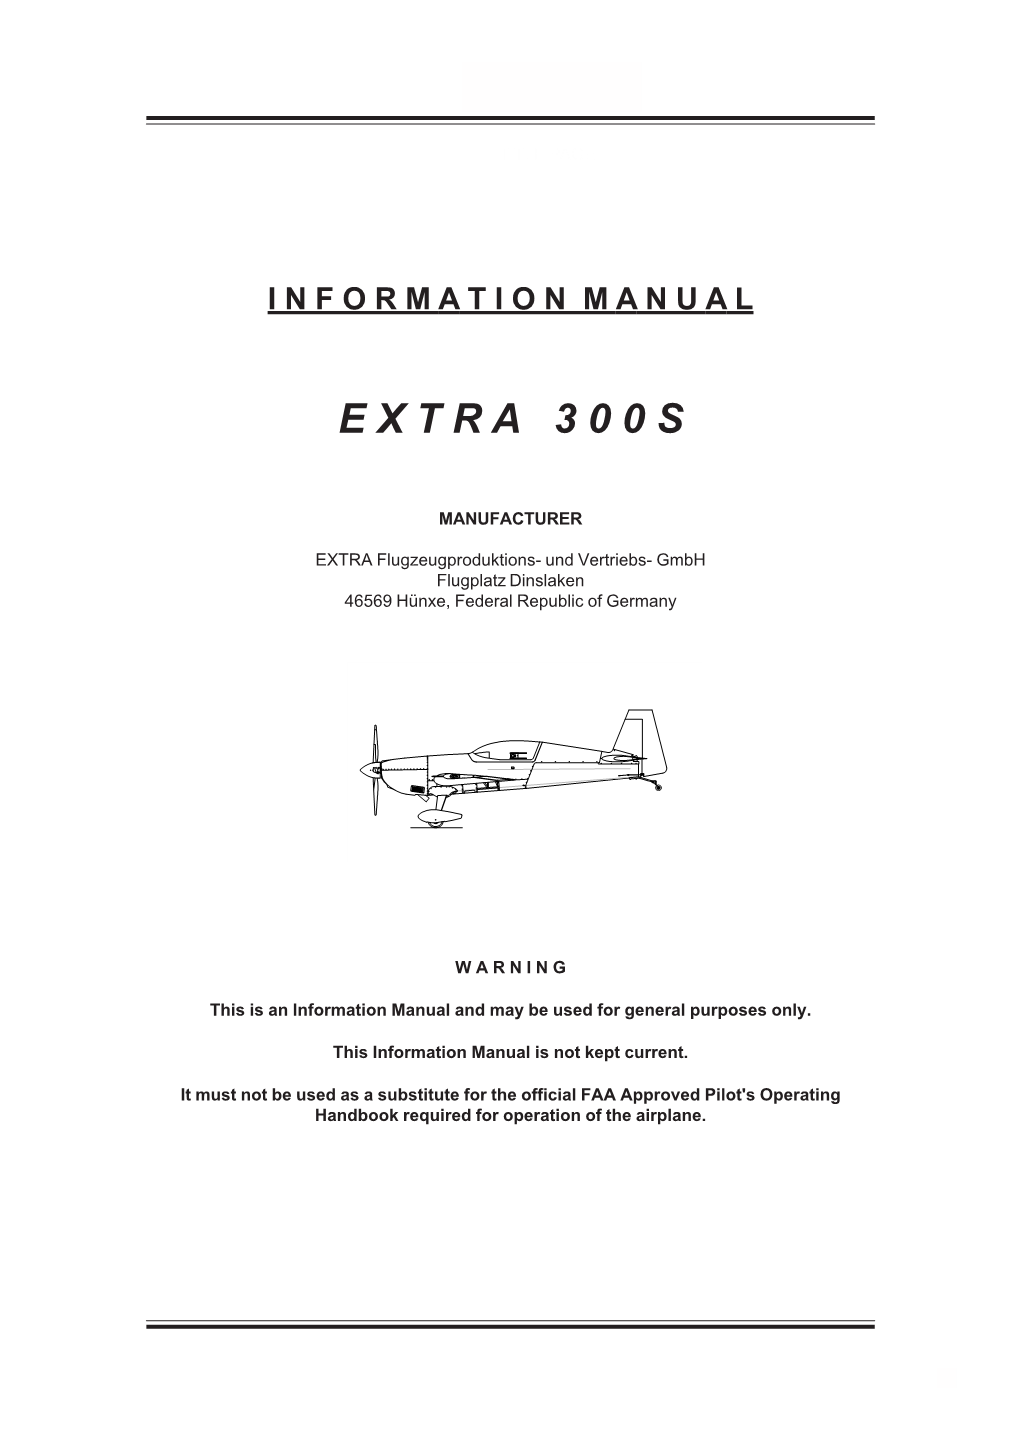 300S Information Manual Title